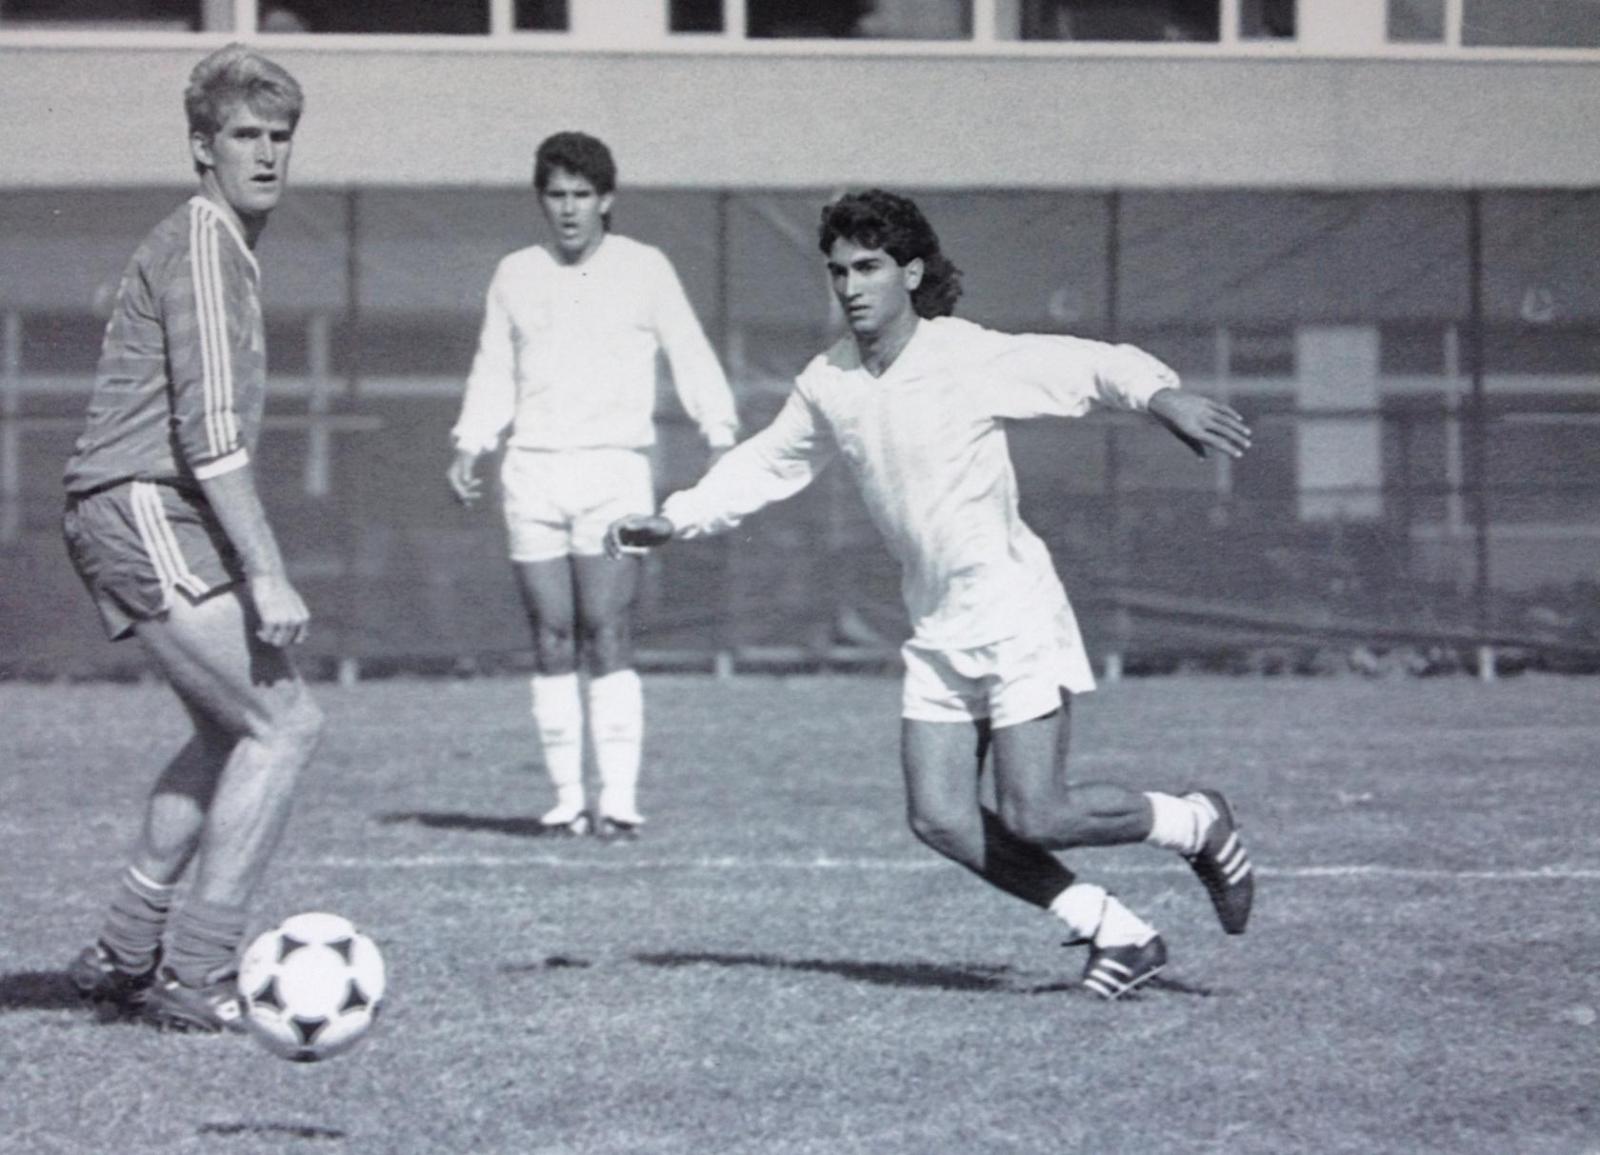 three men, including Christopher Ahmad, MD, playing soccer